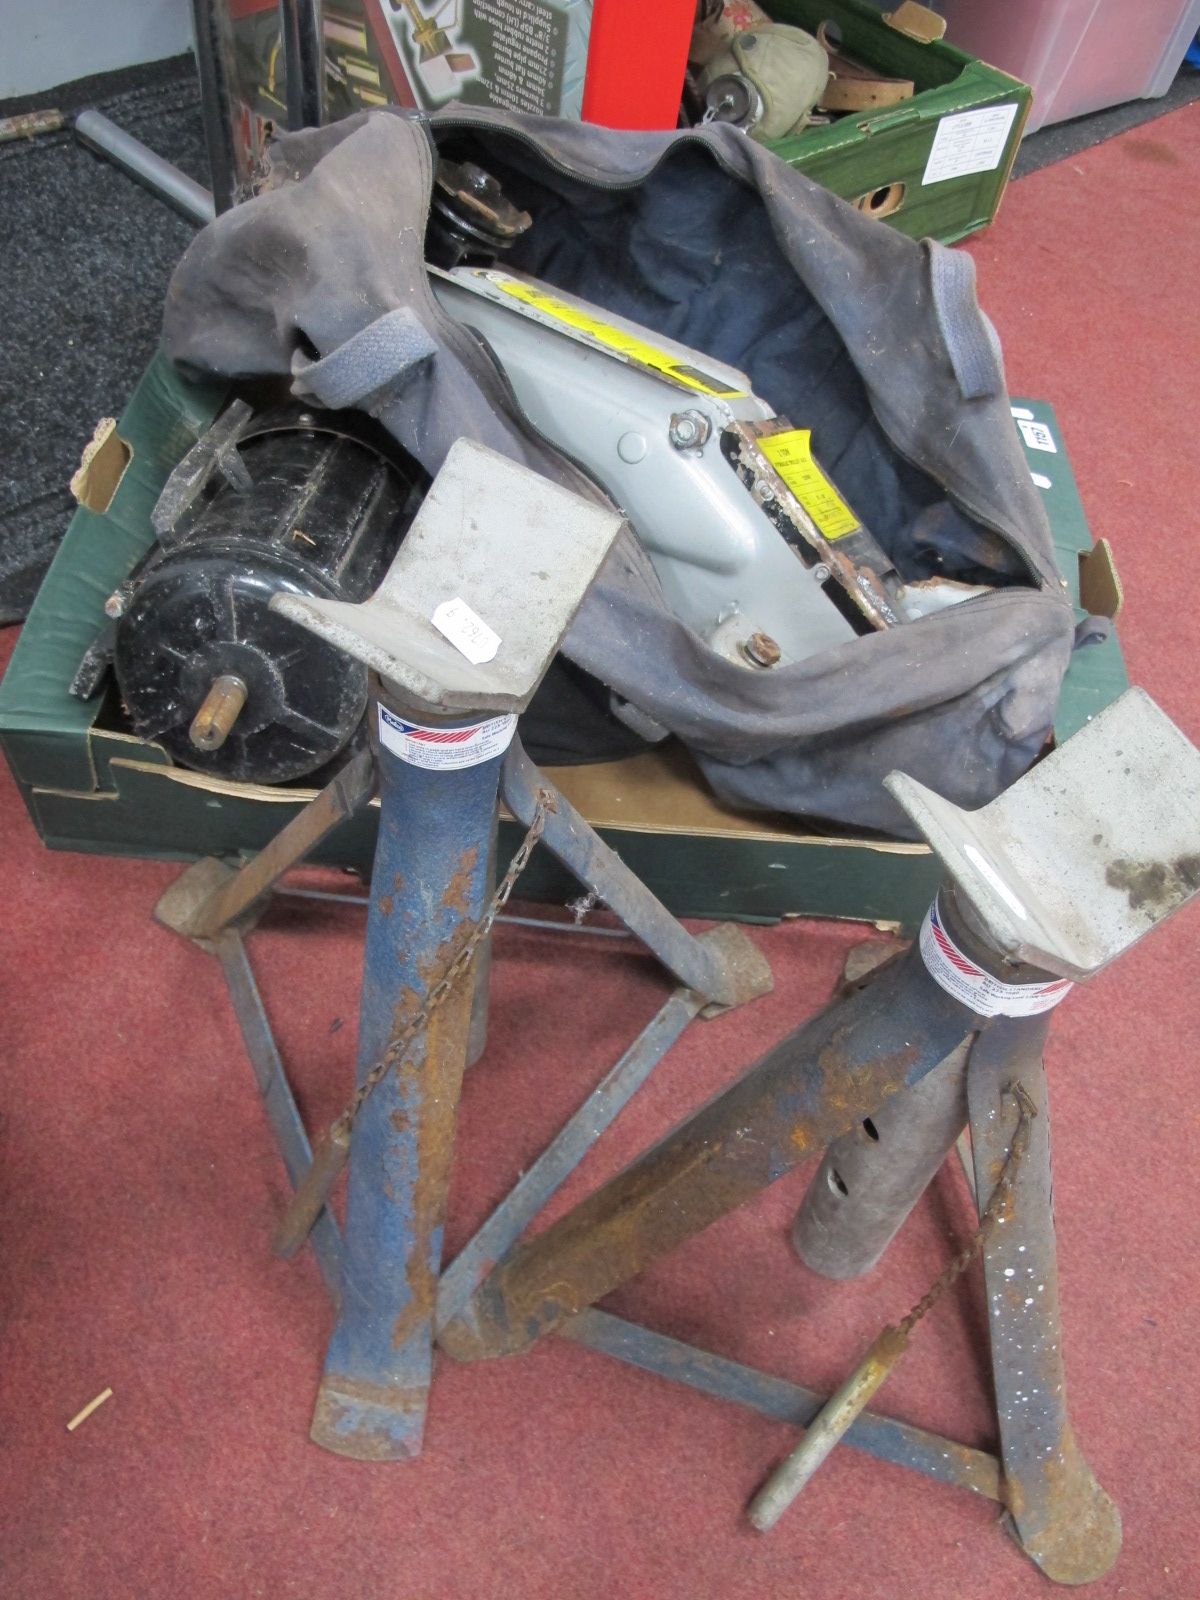 Mechamps Tools, pair of Medco axle stands, trolley jacks, electric motor etc:- One Box.